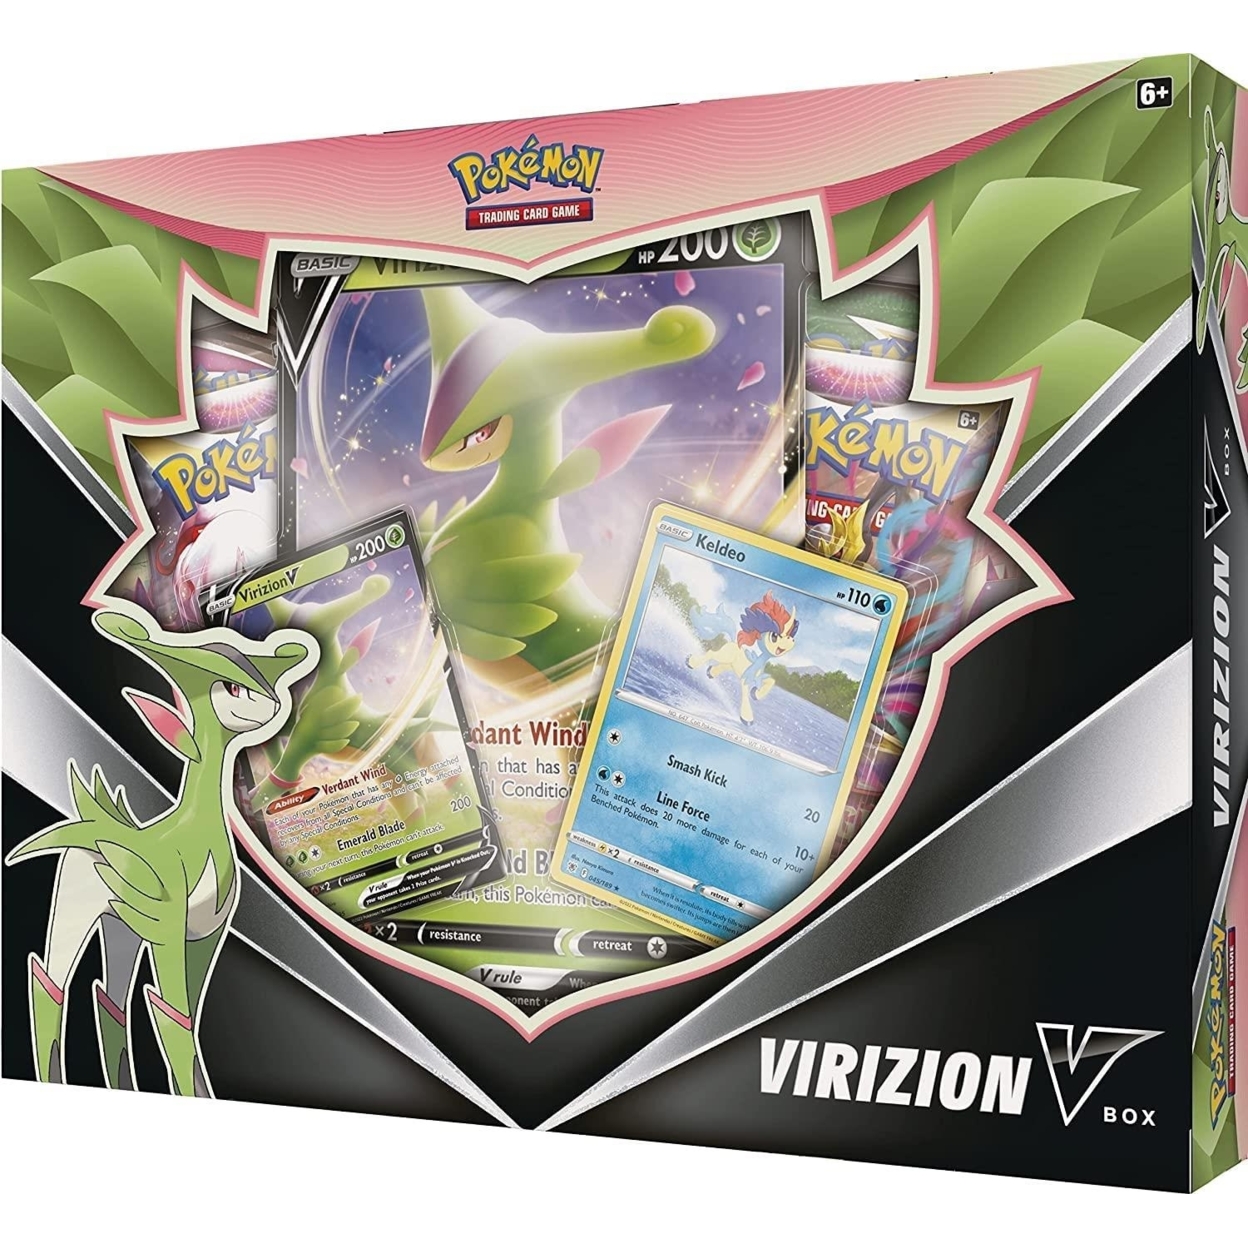 Virizion V Pokemon TCG Collection Box Booster Packs Trading Card Game Foil Cards